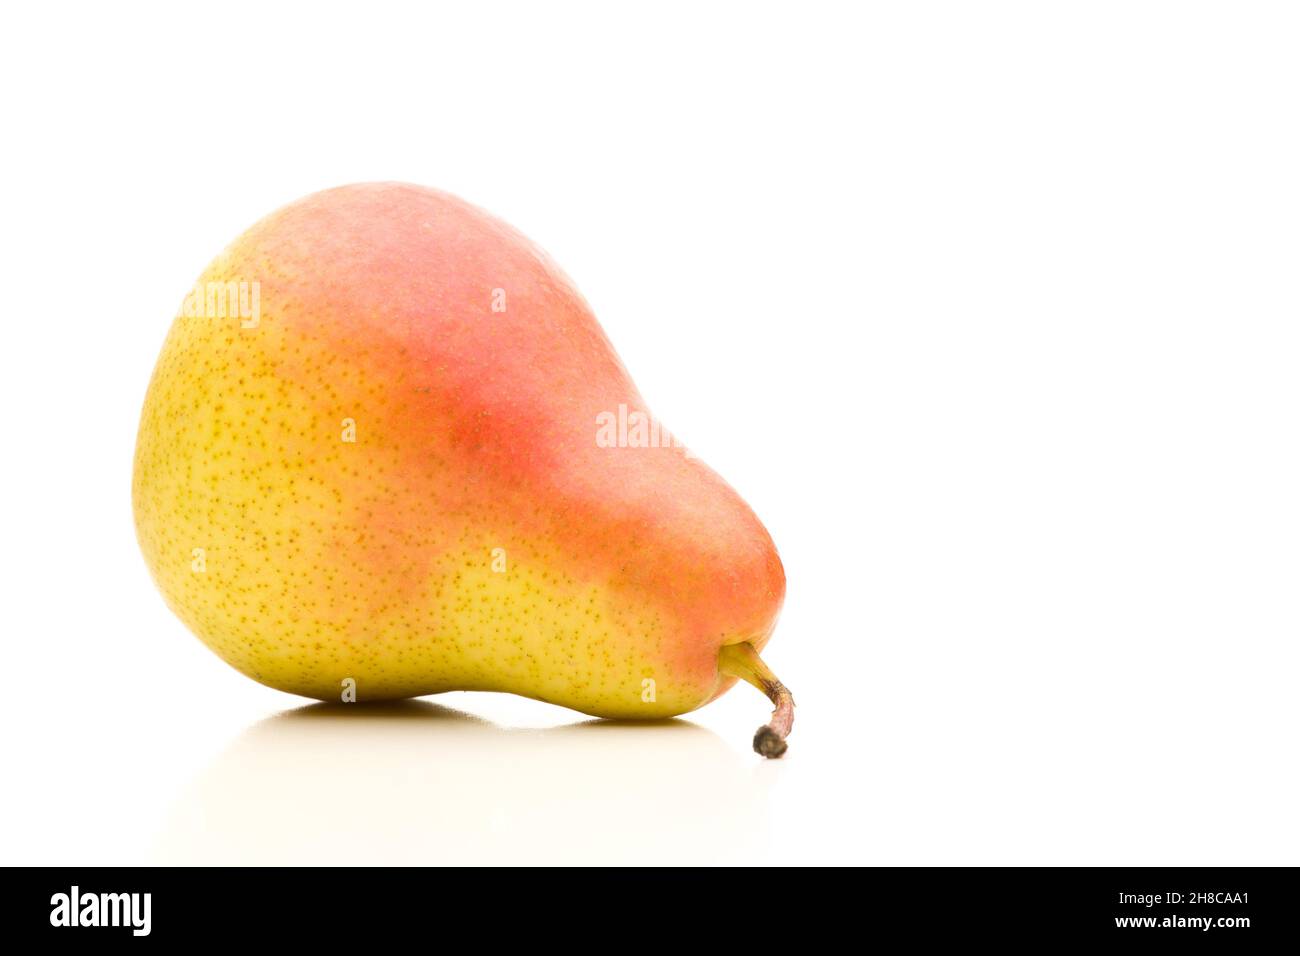 Single red yellow pear lying sideways on white background Stock Photo